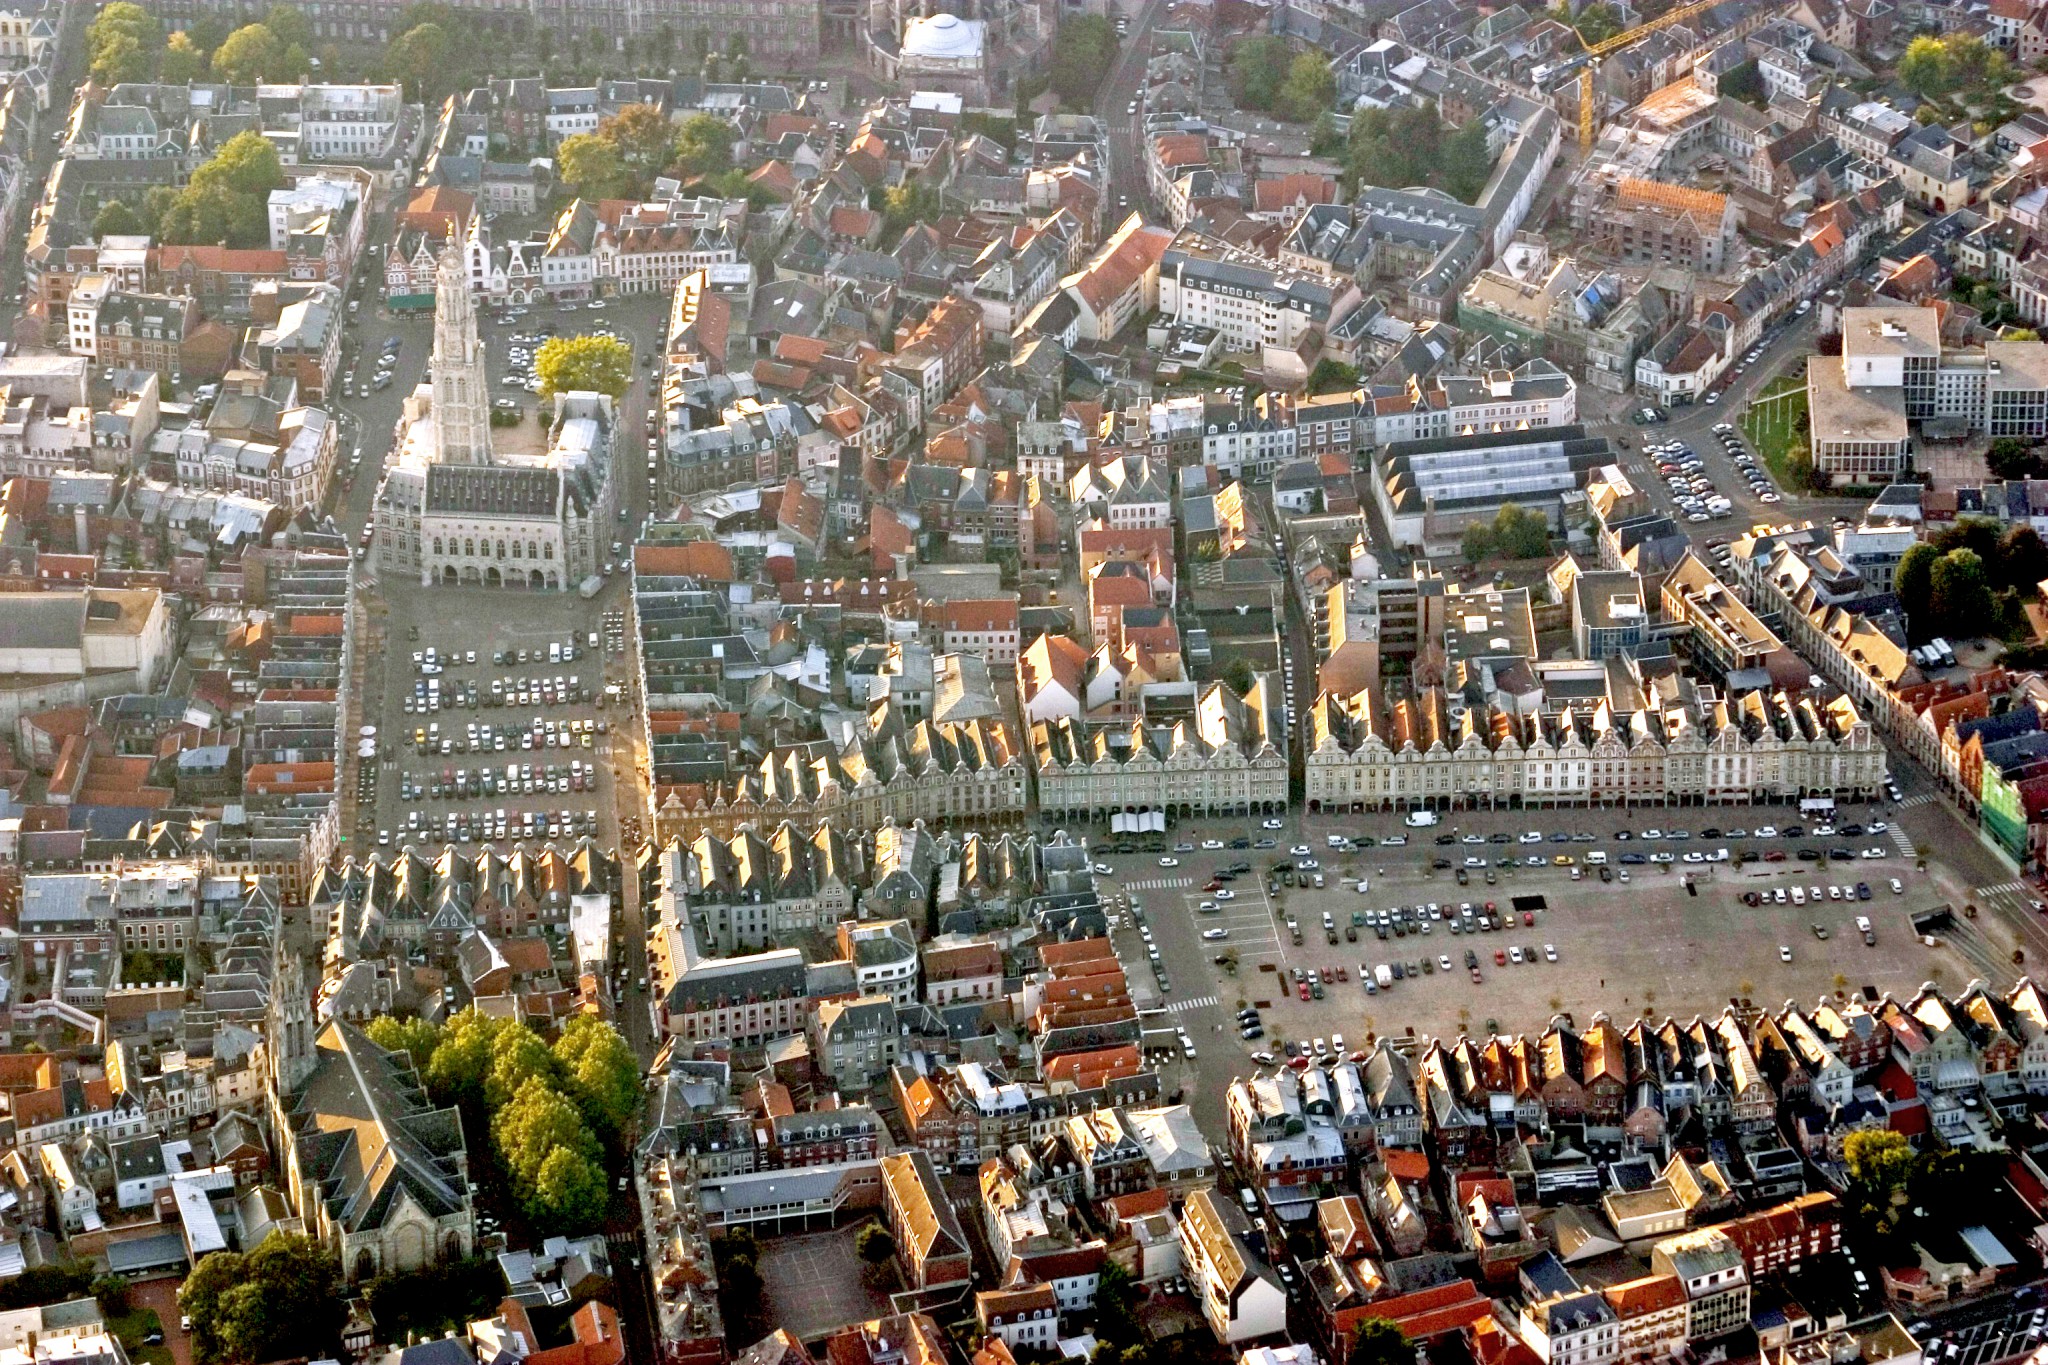 Squares of Arras from above © Pir6mon - licence [CC BY-SA 3.0] from Wikimedia Commons